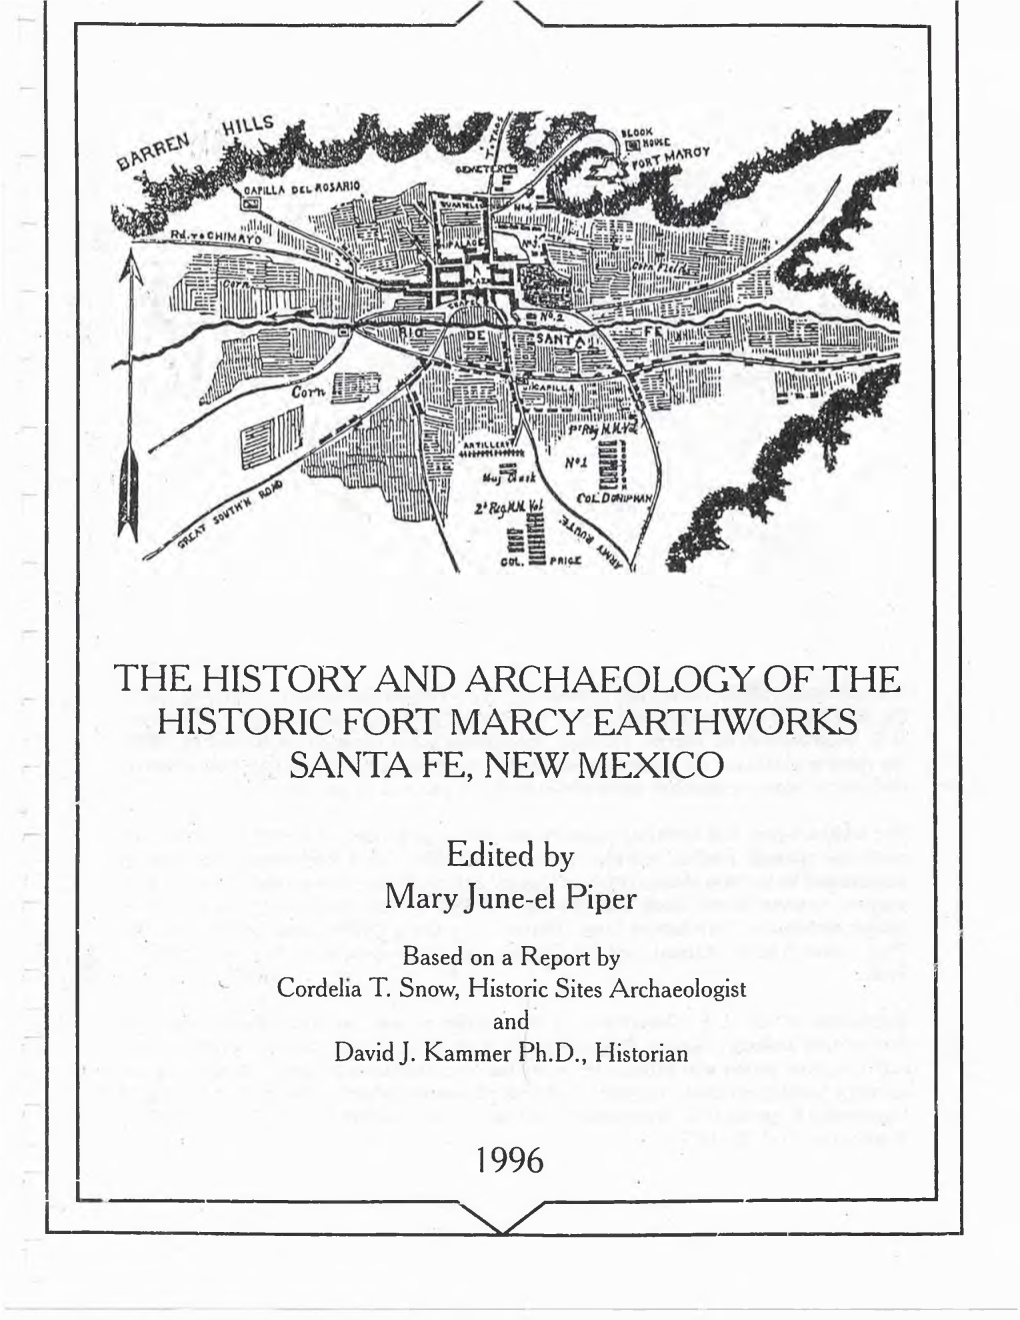 The History and Archaeology of the Historic Fort Marcy Earthworks Santa Fe, New Mexico